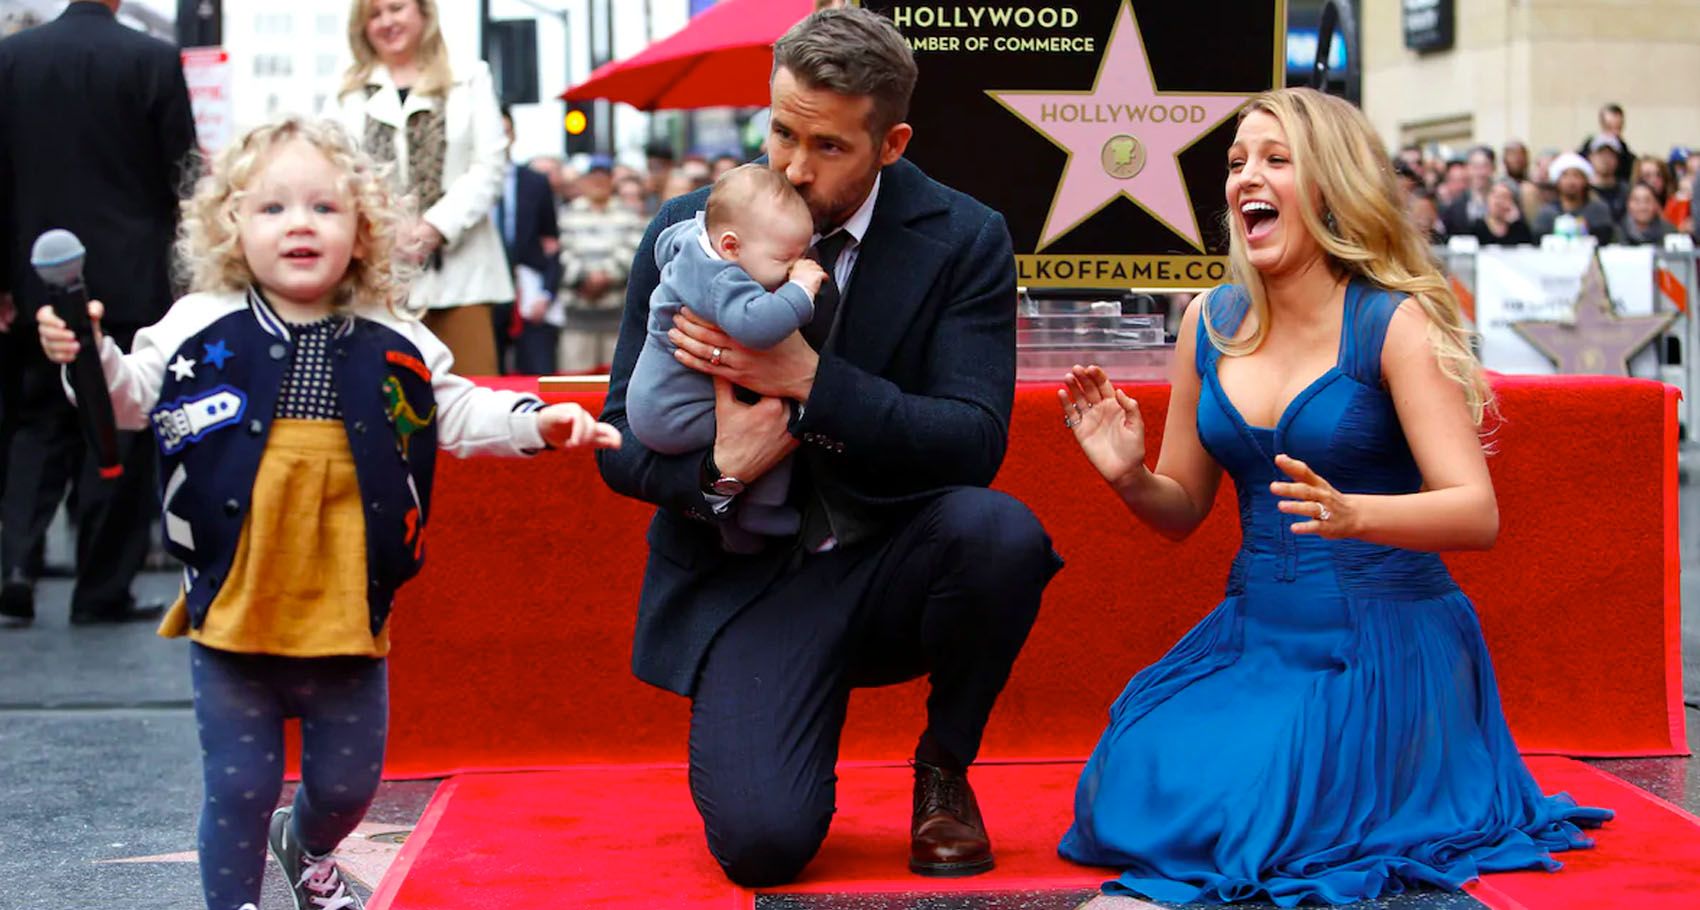 Blake Lively Is Pregnant With Her Third Baby With Ryan Reynolds1700 x 910